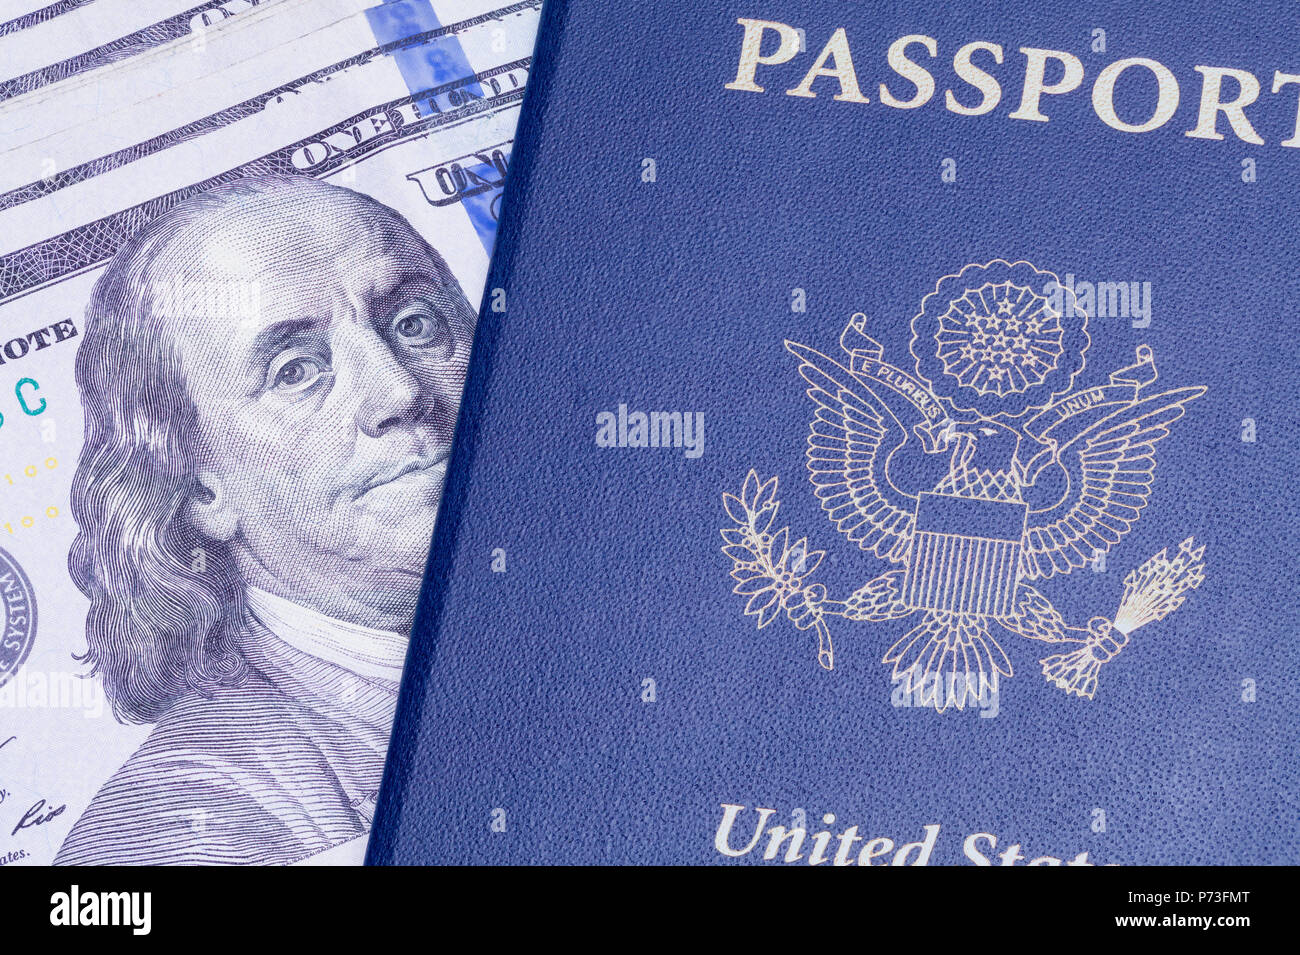 USA Passport with Cash Money Isolated on a White Background. Stock Photo